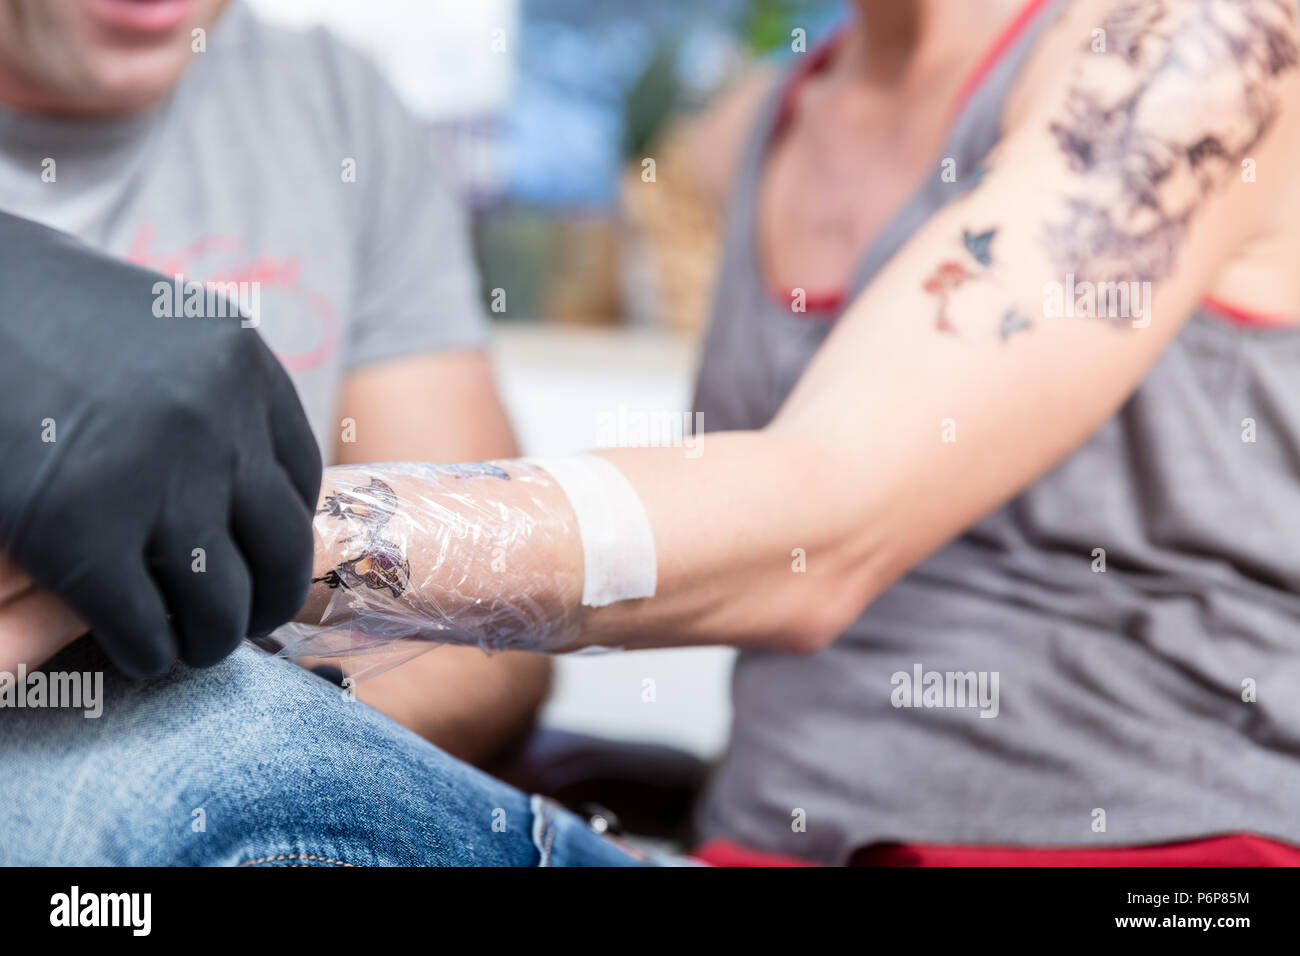 Close-up of the wrapped forearm of a young woman after getting a tattoo Stock Photo